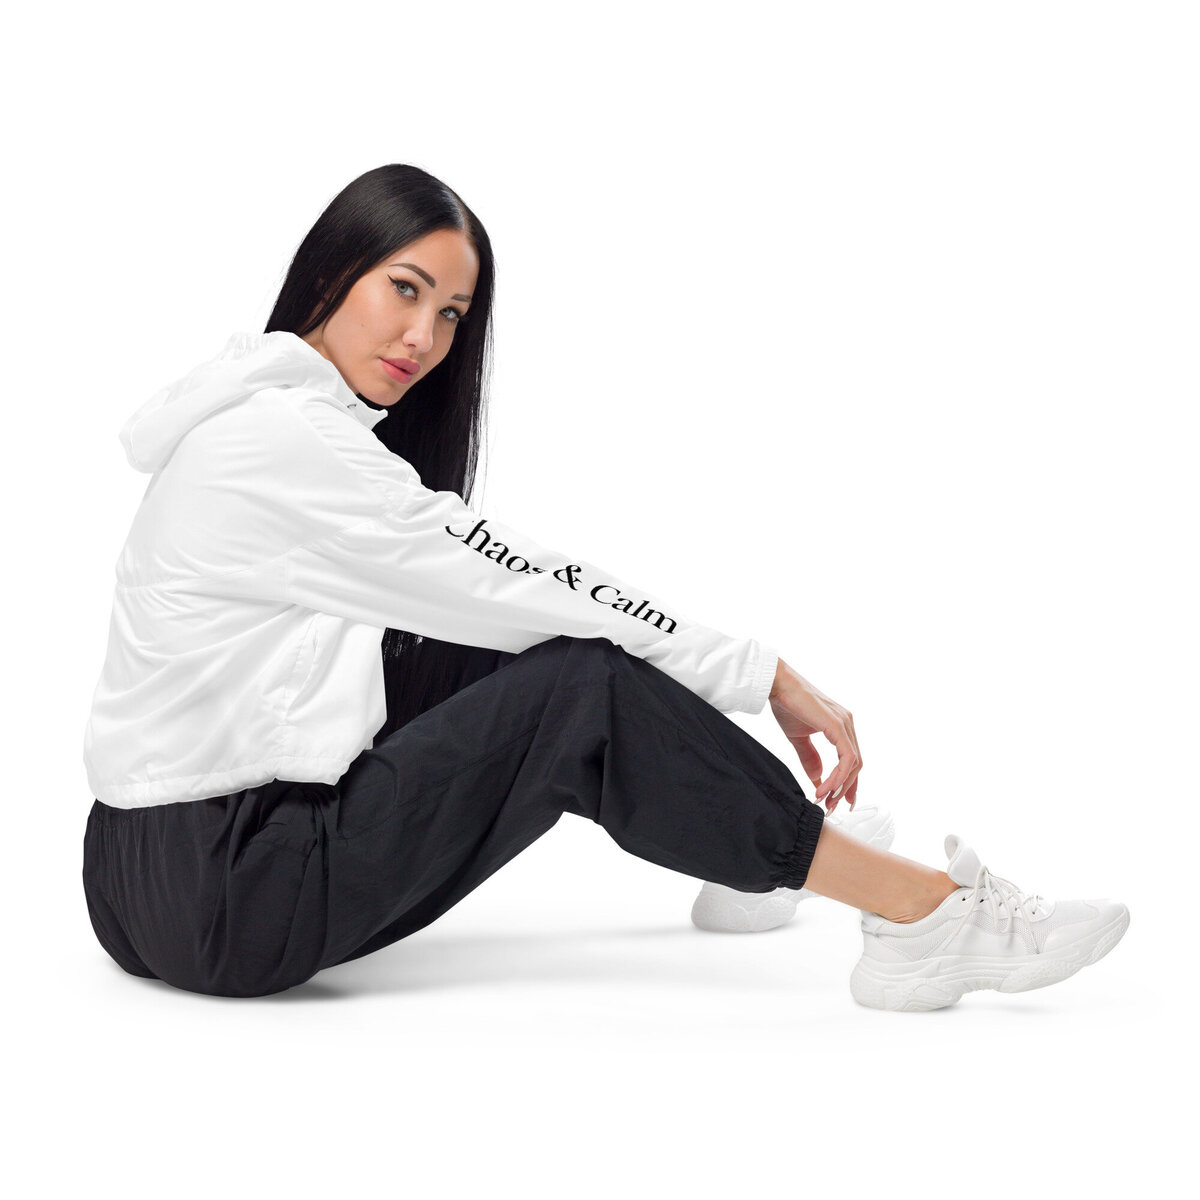 Seated woman wears the Chaos & Calm black and white cropped windbreaker I Merch Shoppe I Chaos  & Calm